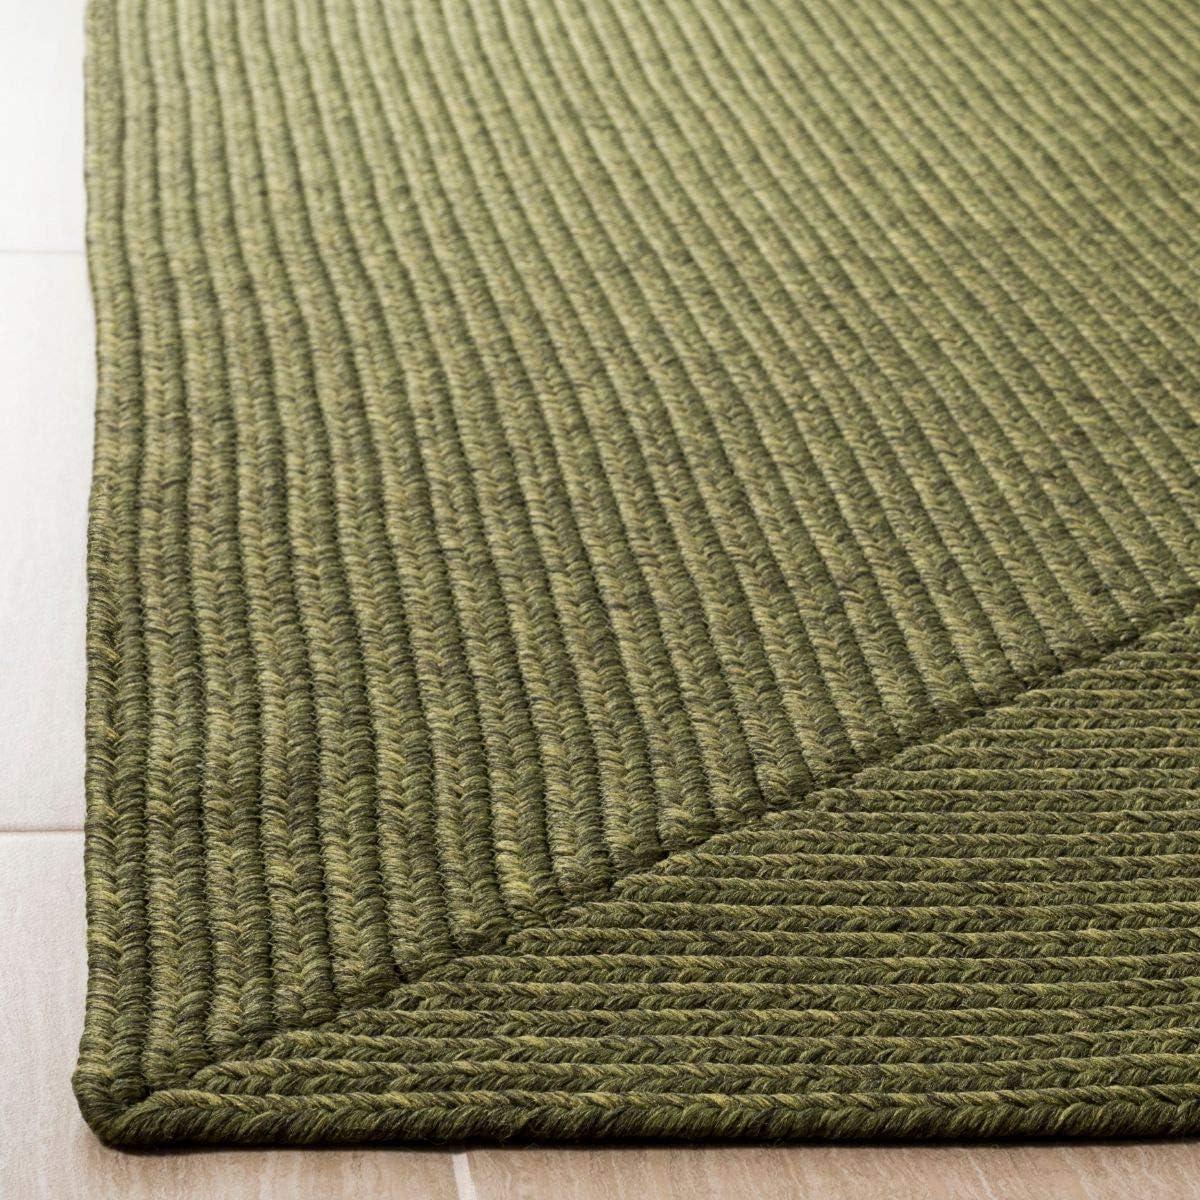 Handwoven Green Braided 4' x 4' Square Synthetic Area Rug